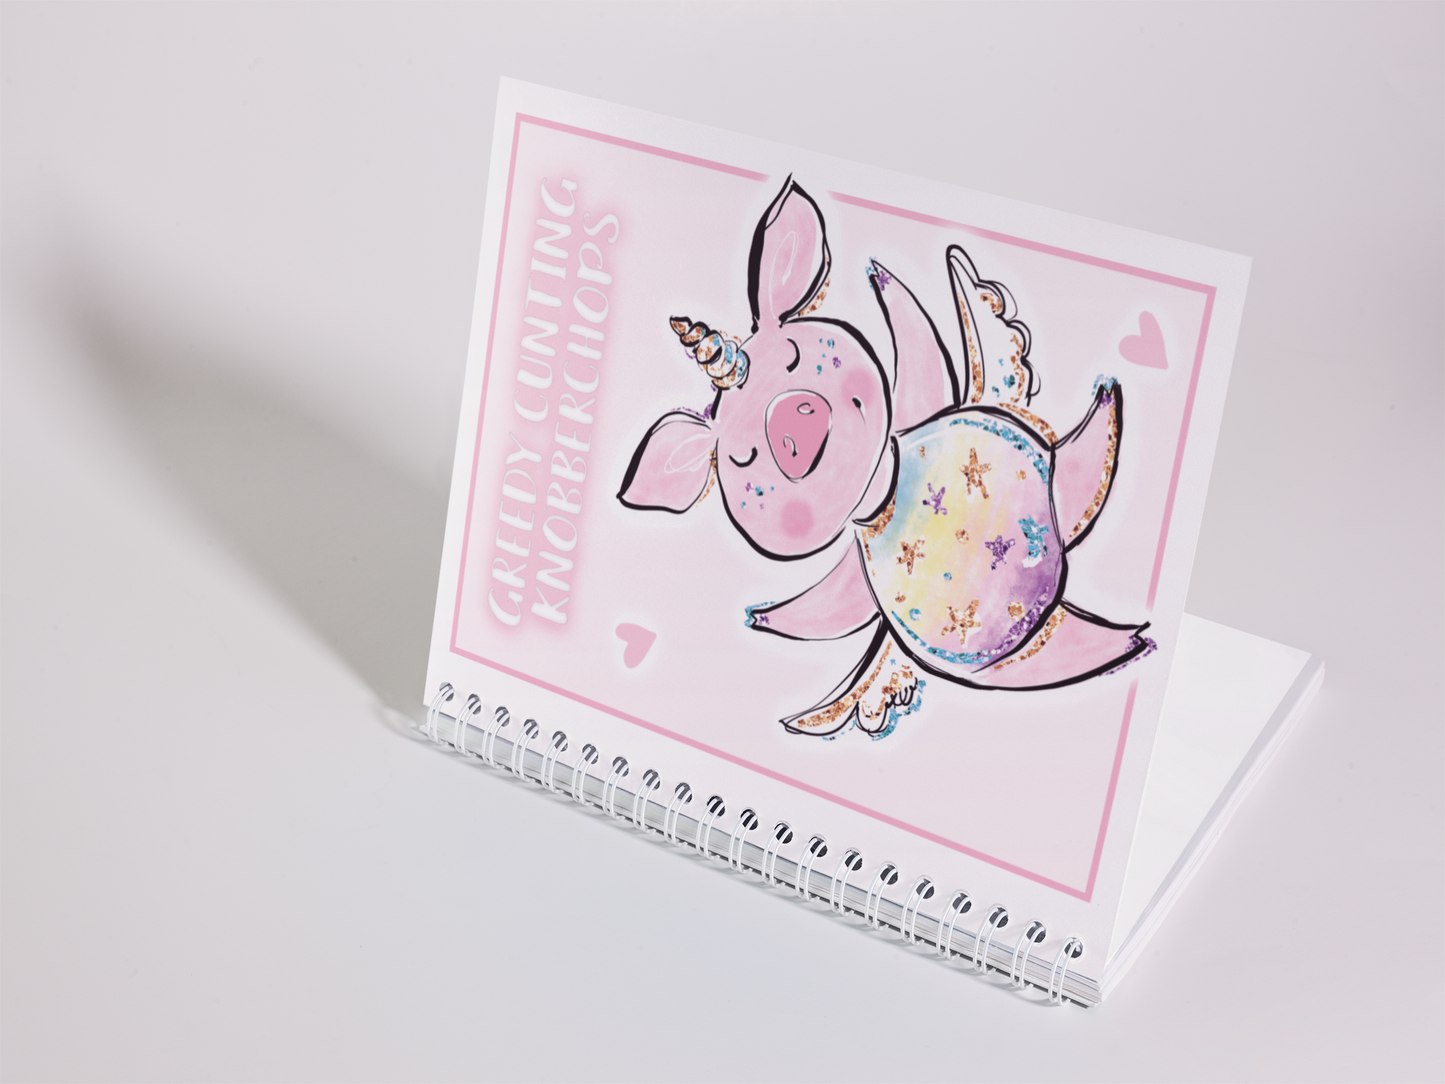 A5 food diary with daily food log pages containing sections for snacks, exercise & water intake. The cover features a fun pink design with a unicorn pig & a quote to the top which reads 'greedy cunting knobberchops'. 